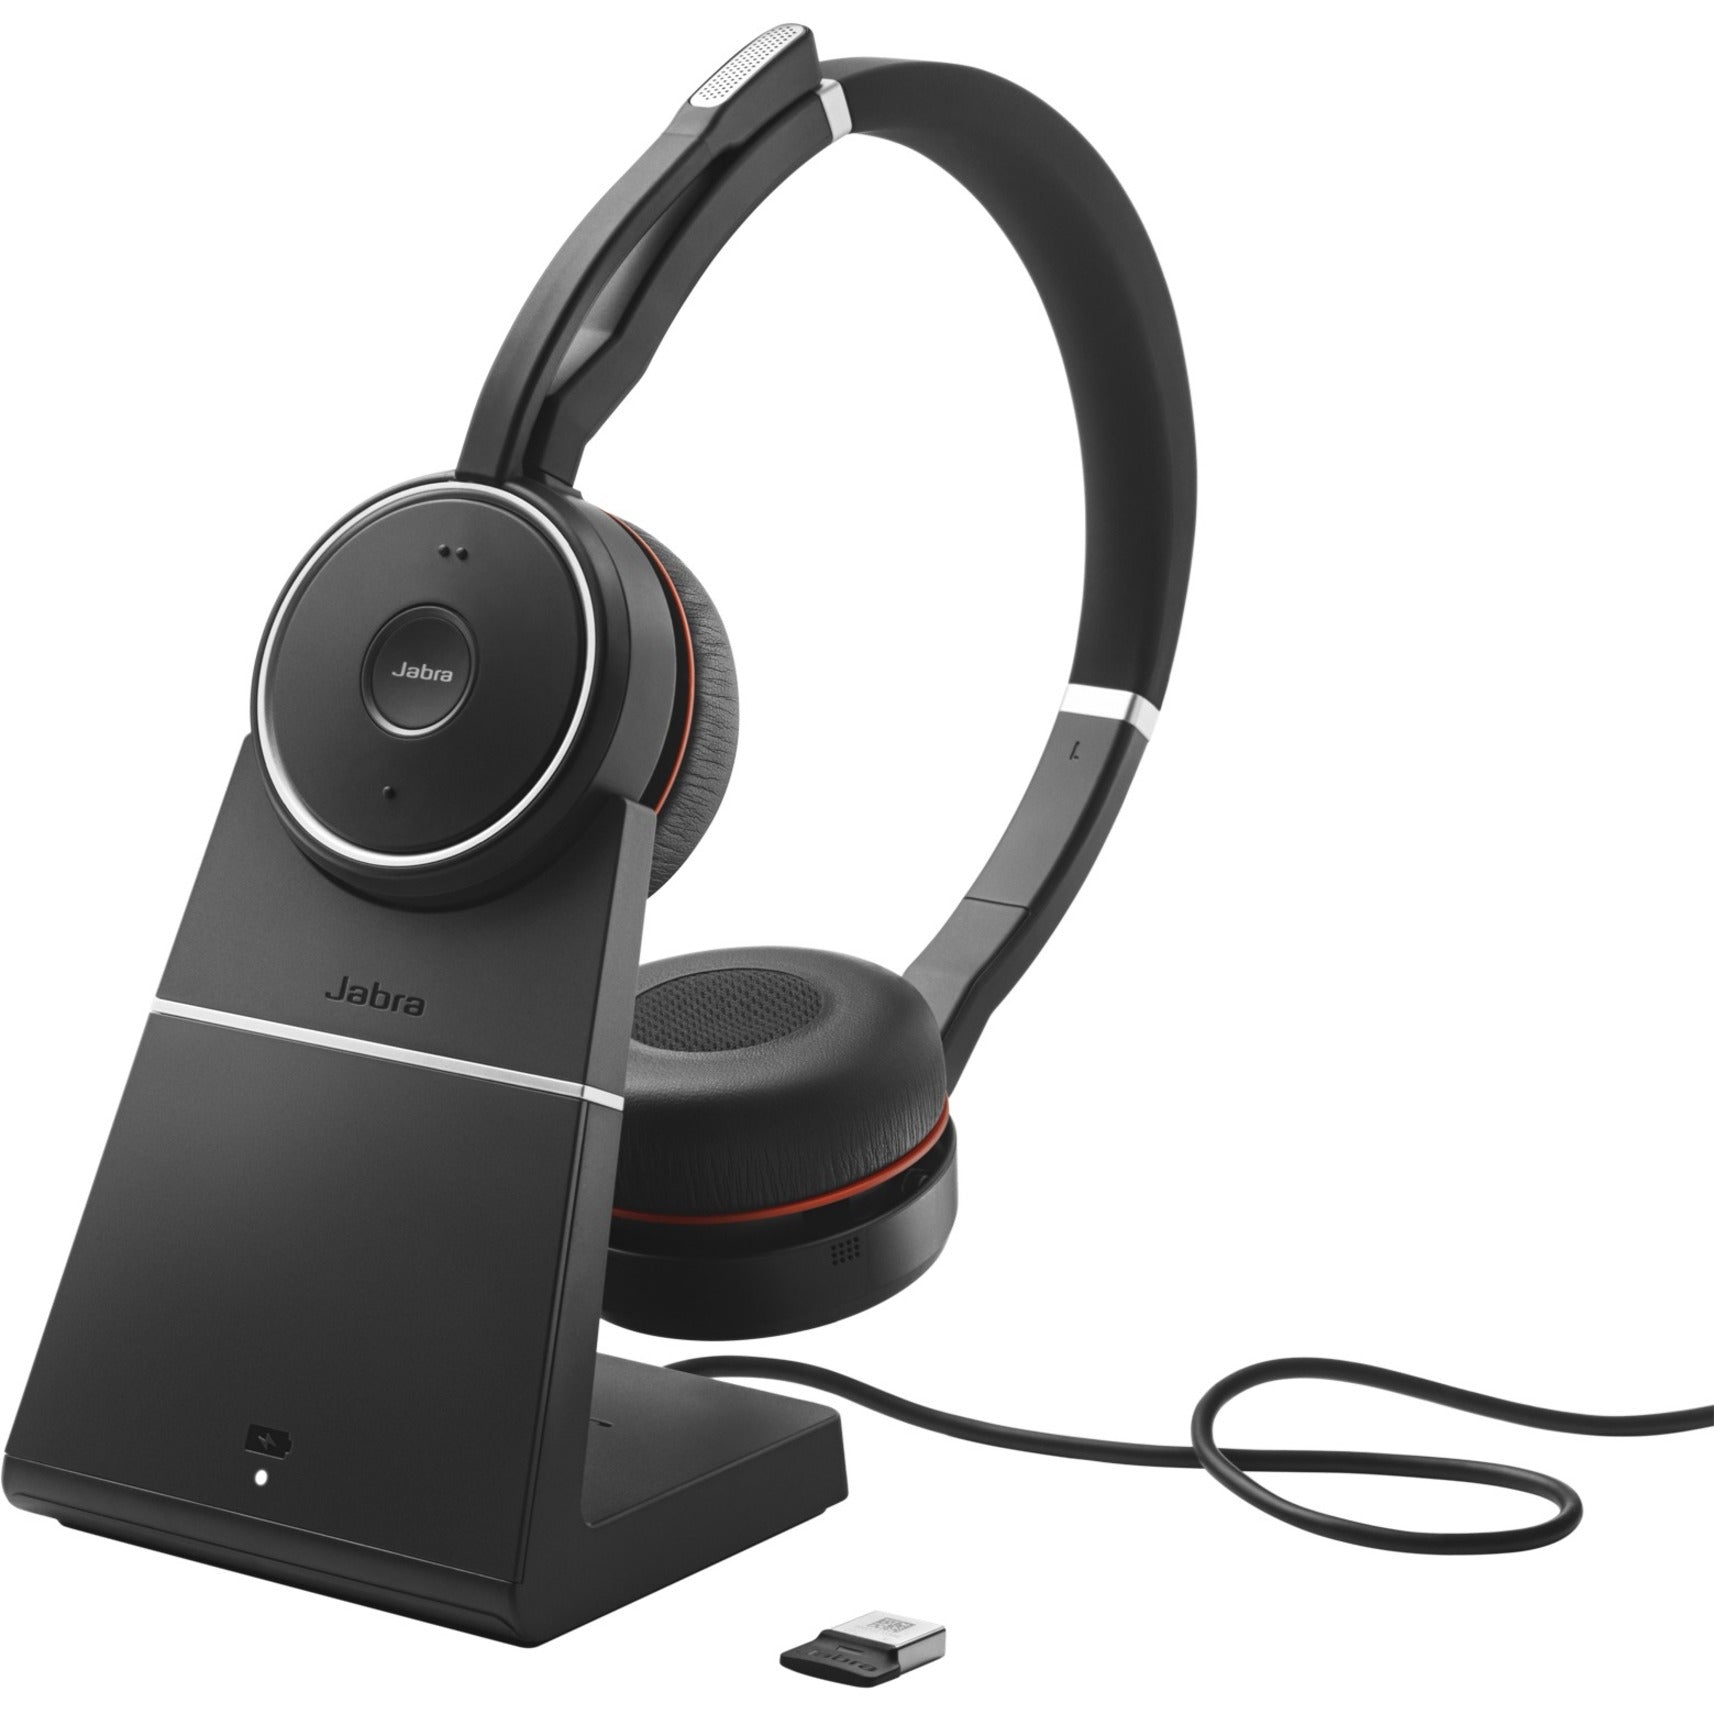 Jabra 7599-832-199 EVOLVE 75 with Charging Stand MS Stereo, Wireless Bluetooth Headset with Noise Canceling